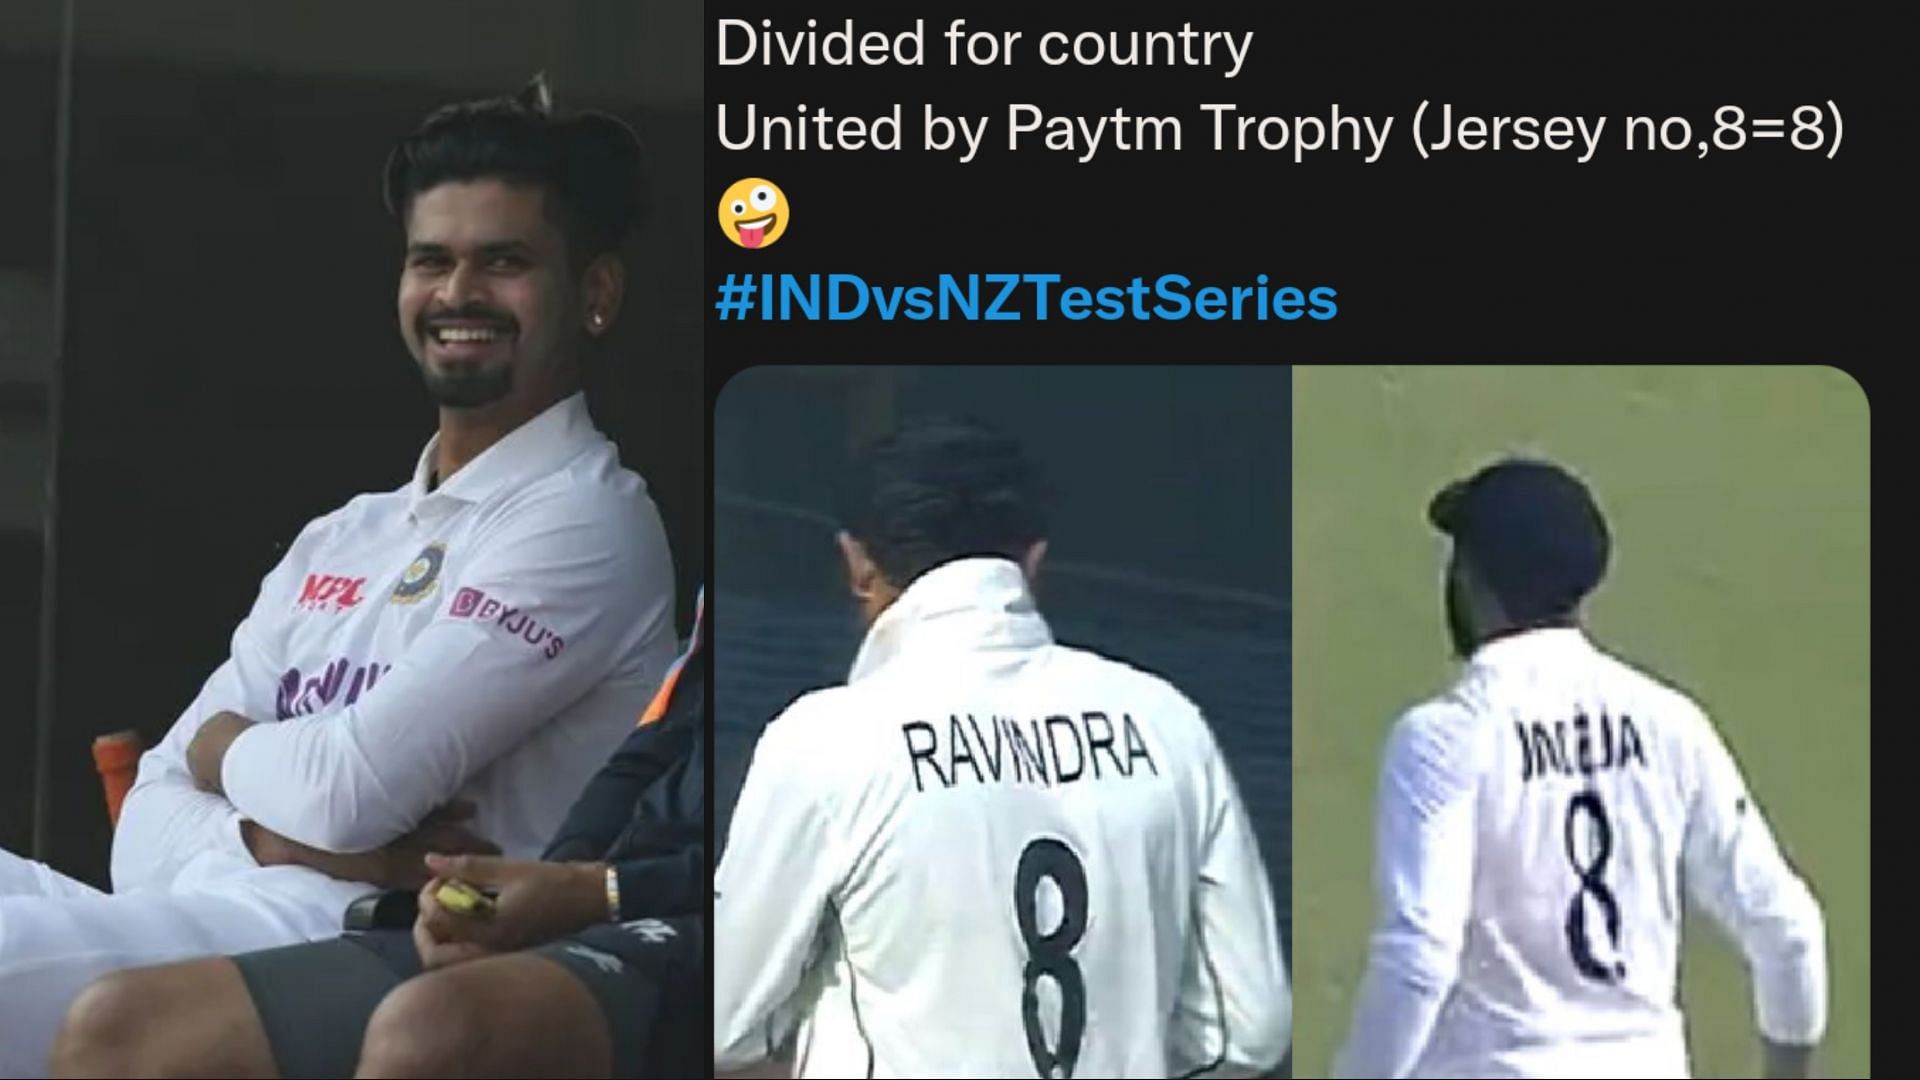 Fans shared some hilarious memes on social media during the 1st day of the India vs New Zealand Test series